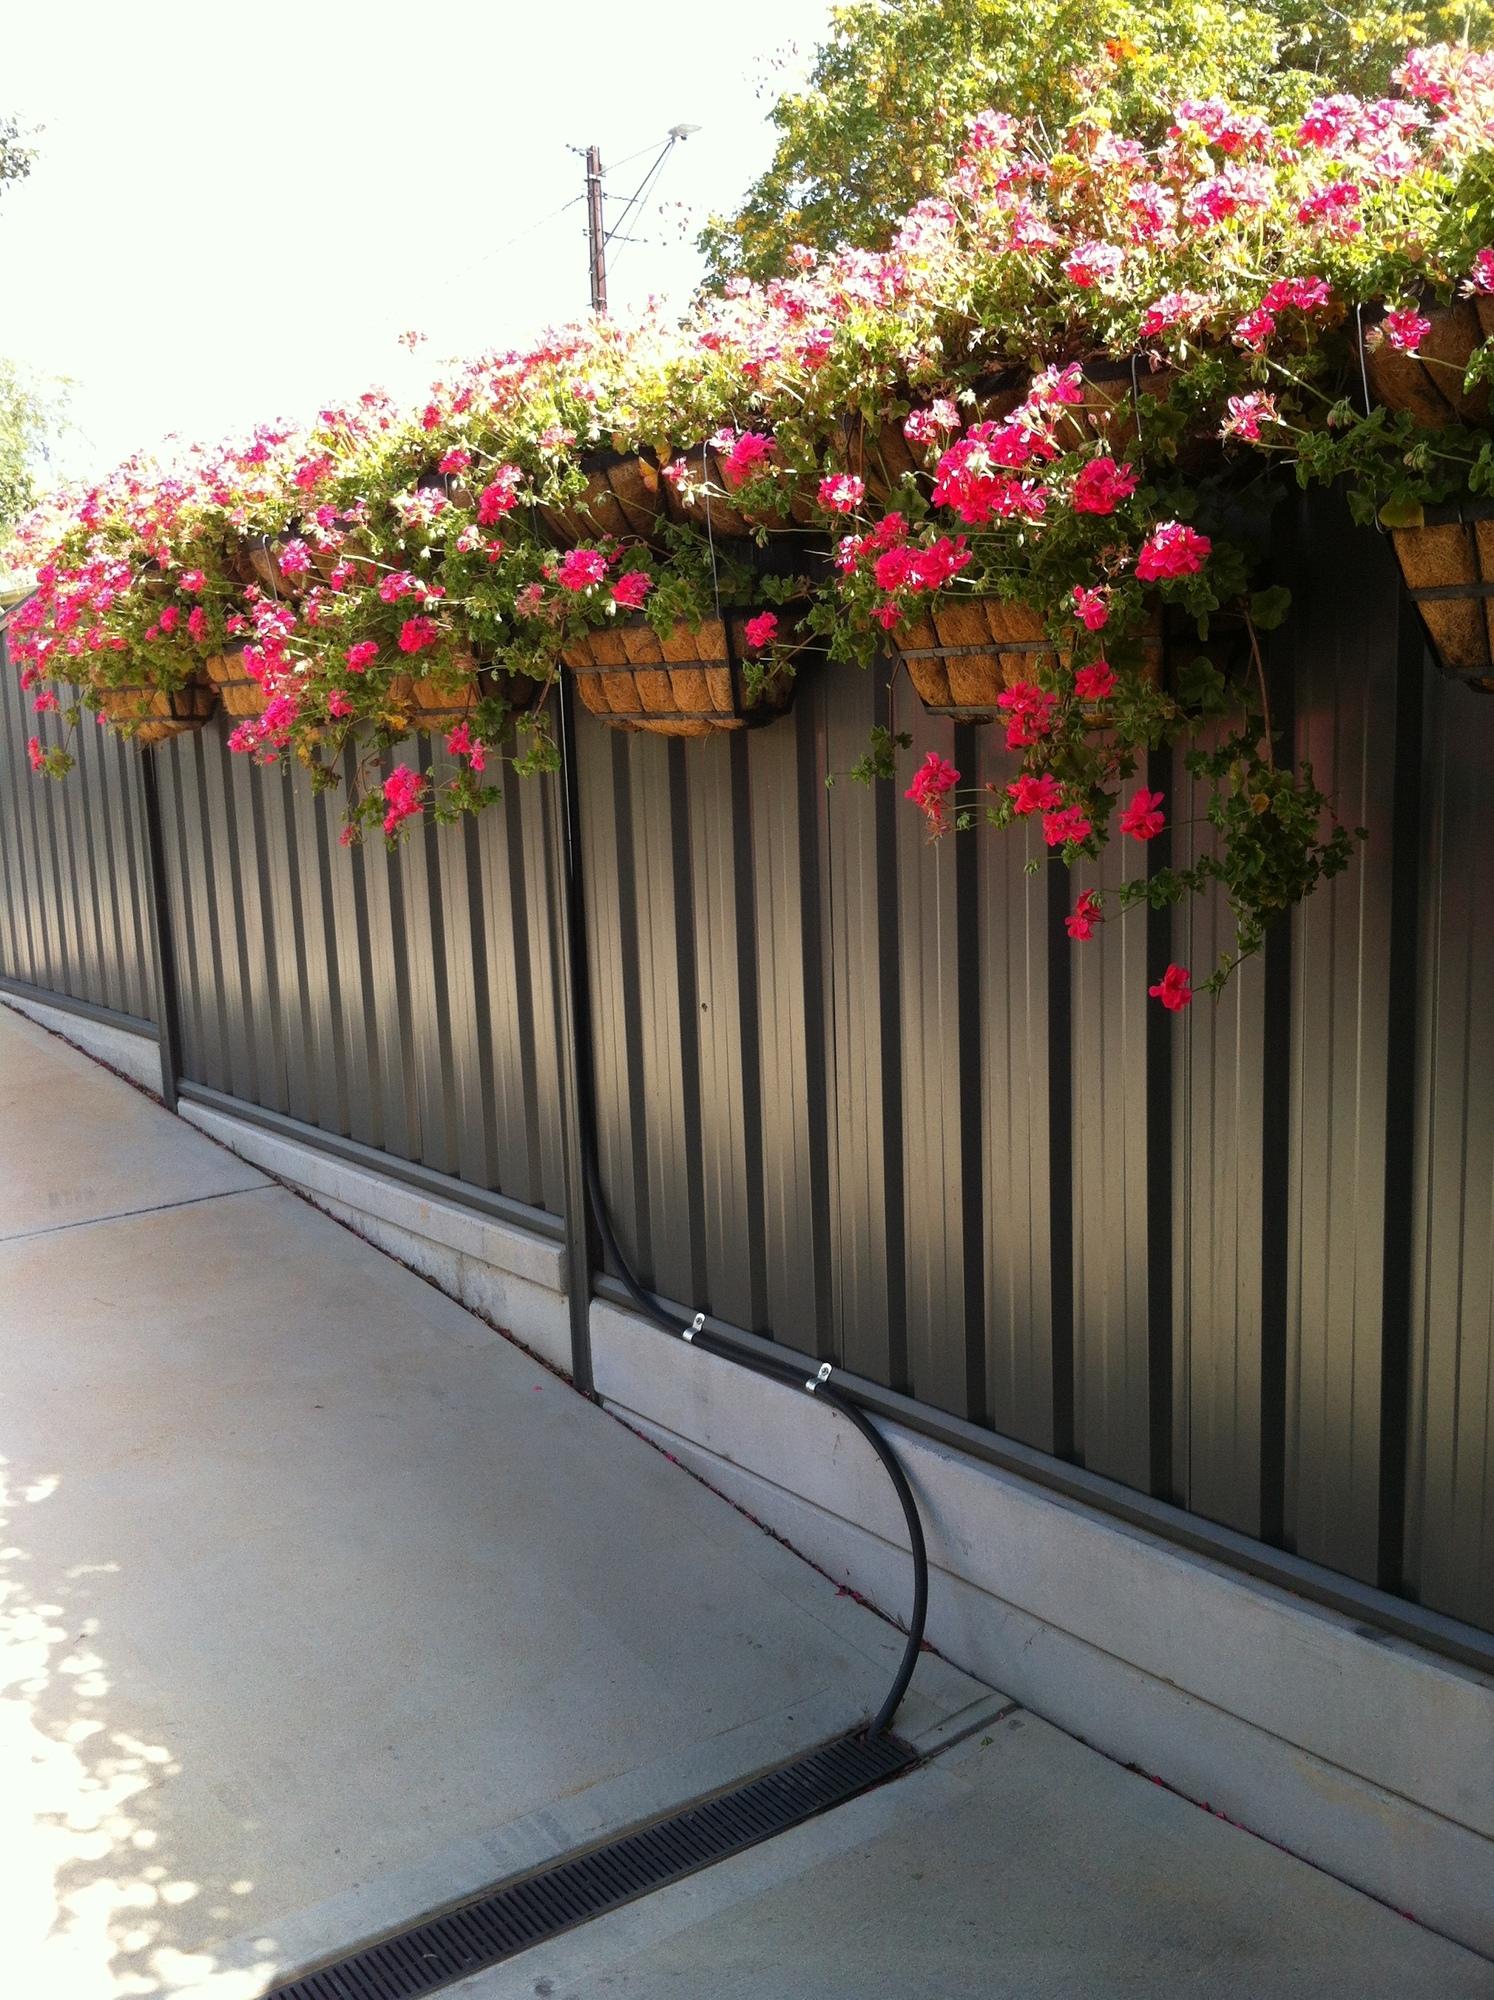 Glenys from St Marys, SA loves COLORBOND® steel. Fencing made from COLORBOND® steel in colour Dune®